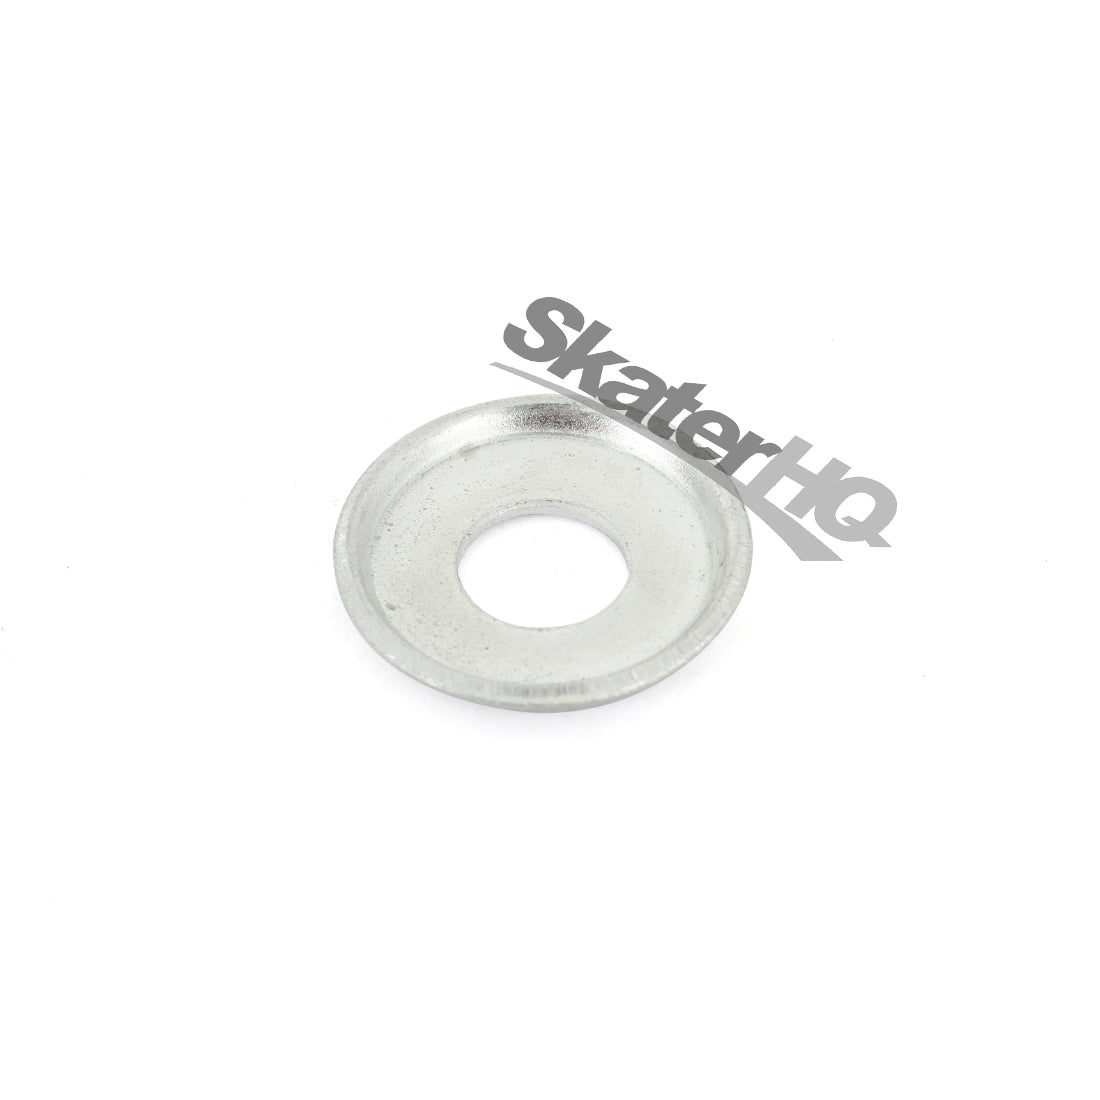 Slant Lower Cup Washer - Single Skateboard Hardware and Parts